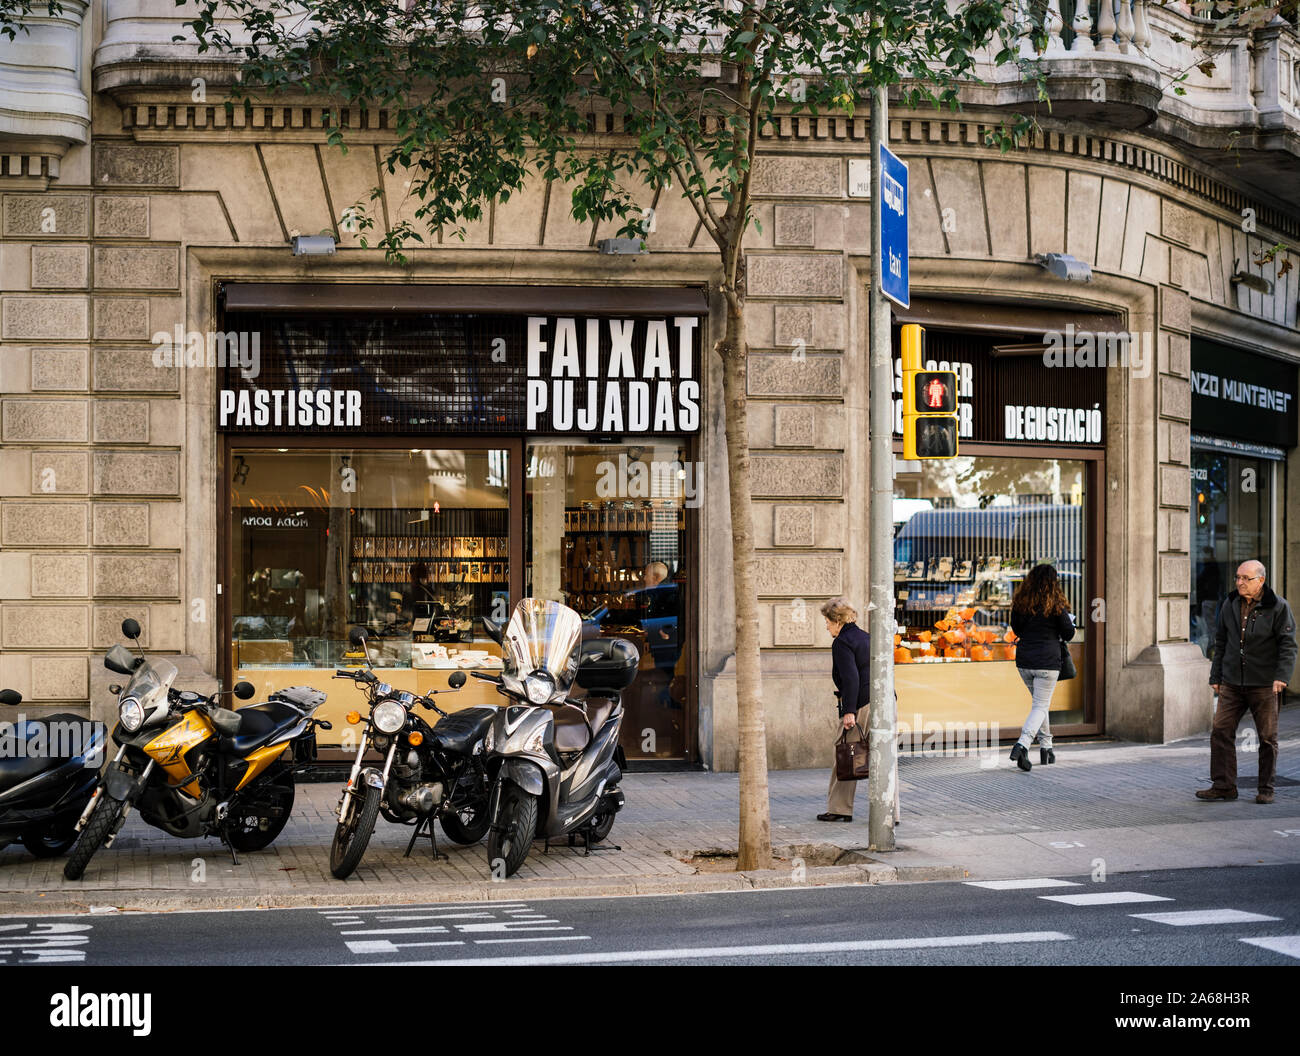 Barcelona, Spain - Nov 14 2017: Pastisser bakery store Faixat Pujadas on  the Carrer de Muntaner, 159 street with pedestrians locals walking on a  calm fall day Stock Photo - Alamy